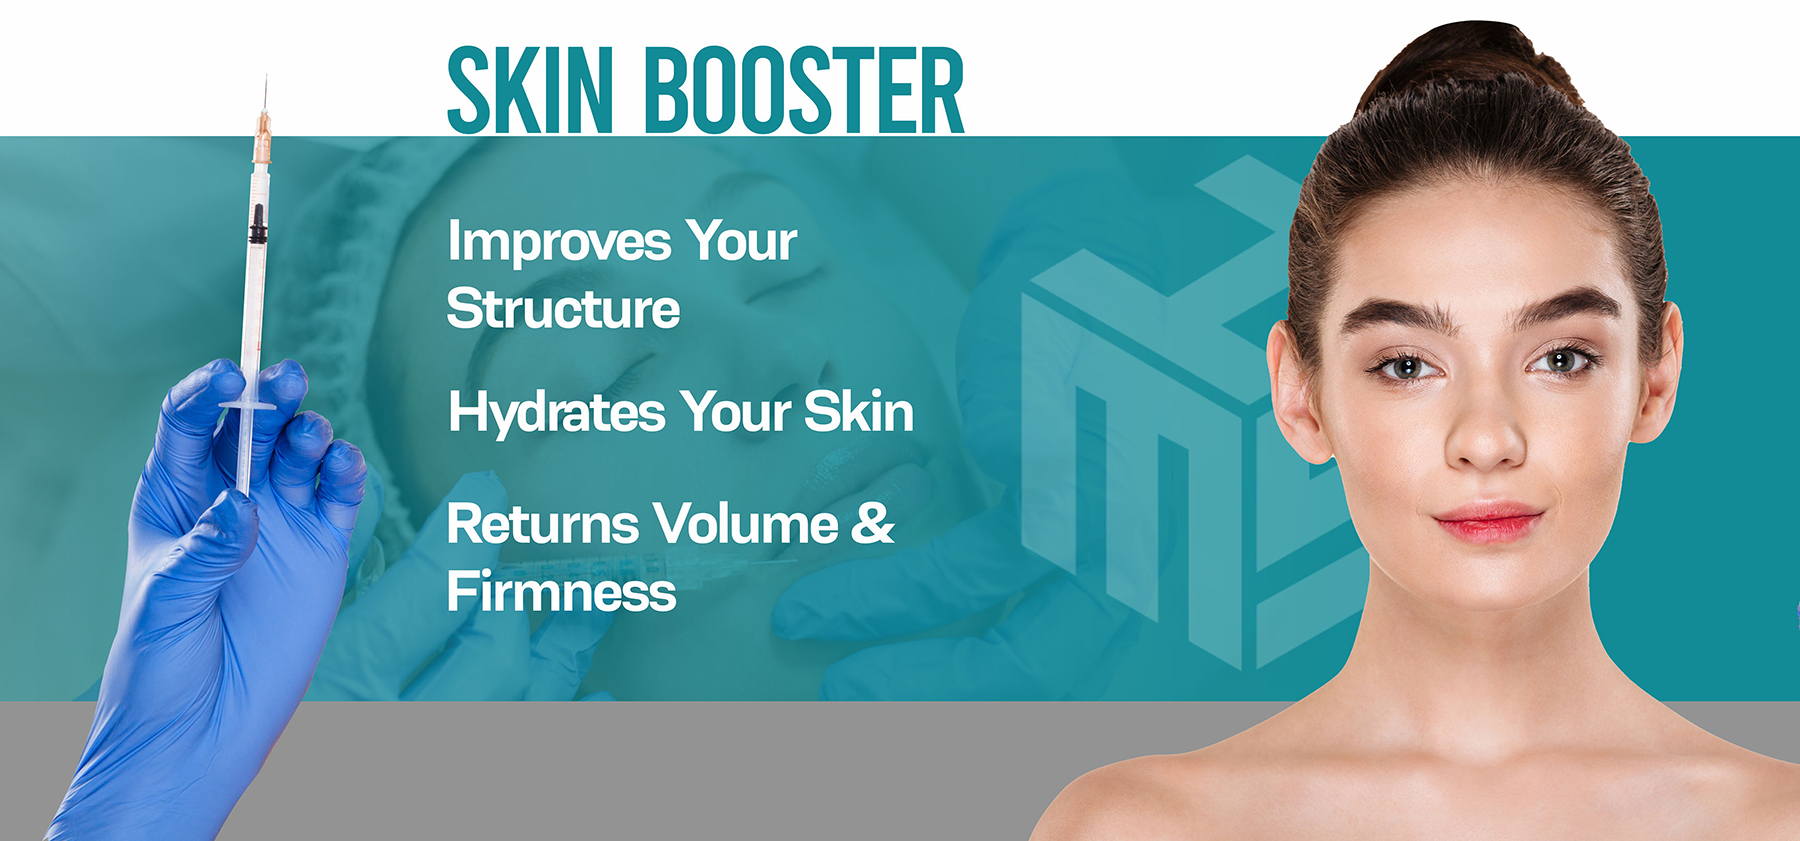 Skin Booster Treatment: Enhance Your Natural Radiance